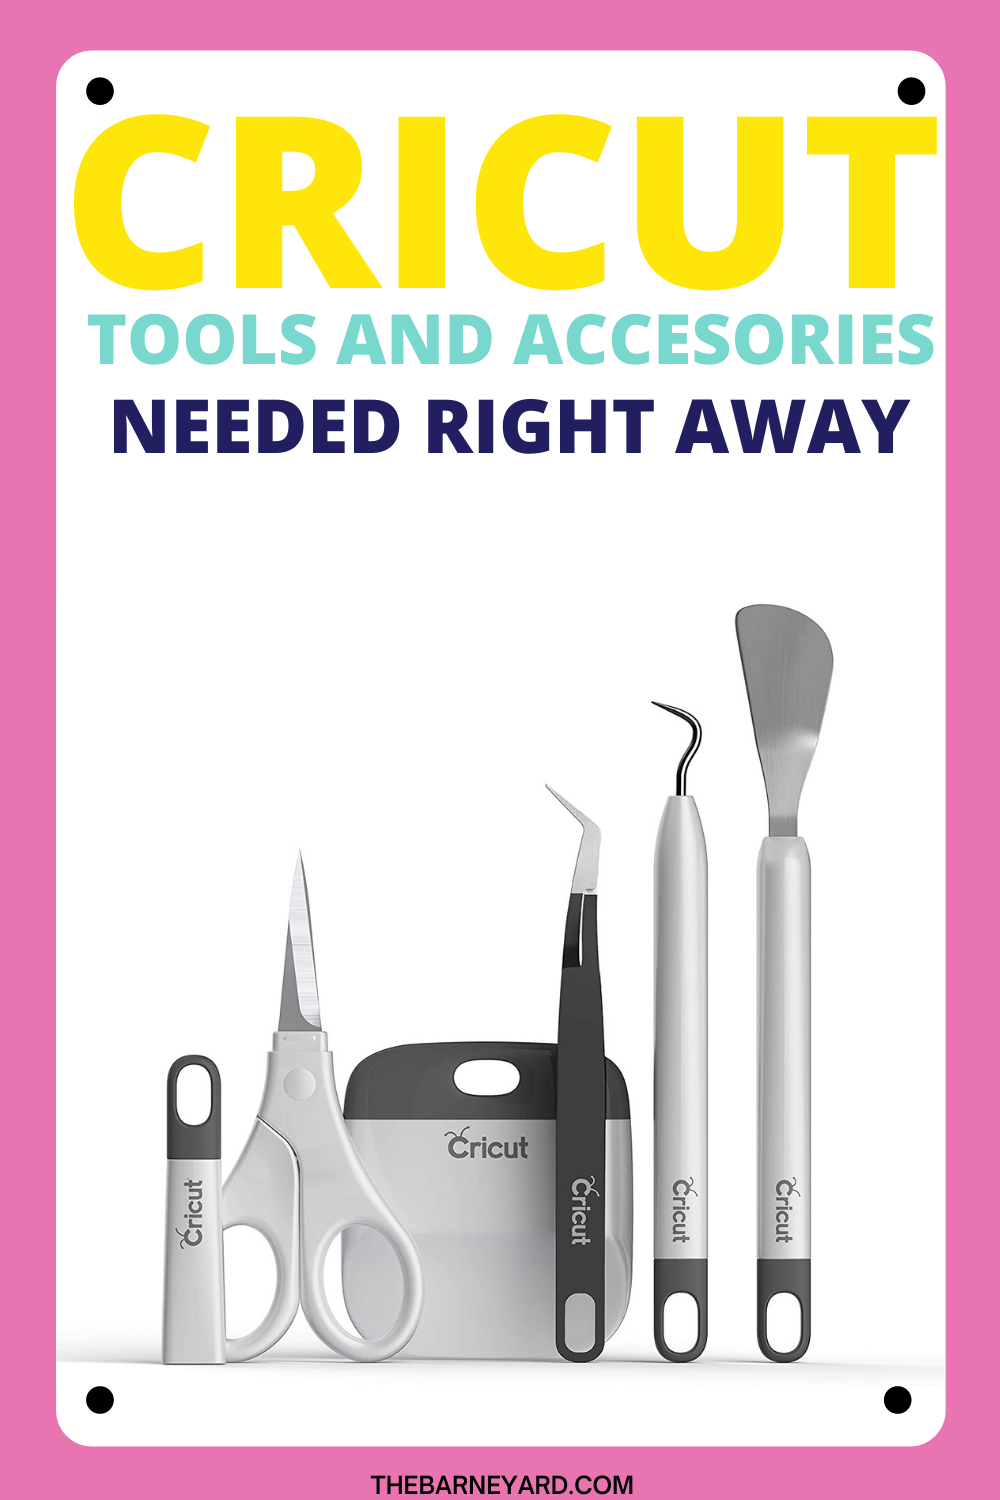 What Cricut Accessories & Materials do I really need?